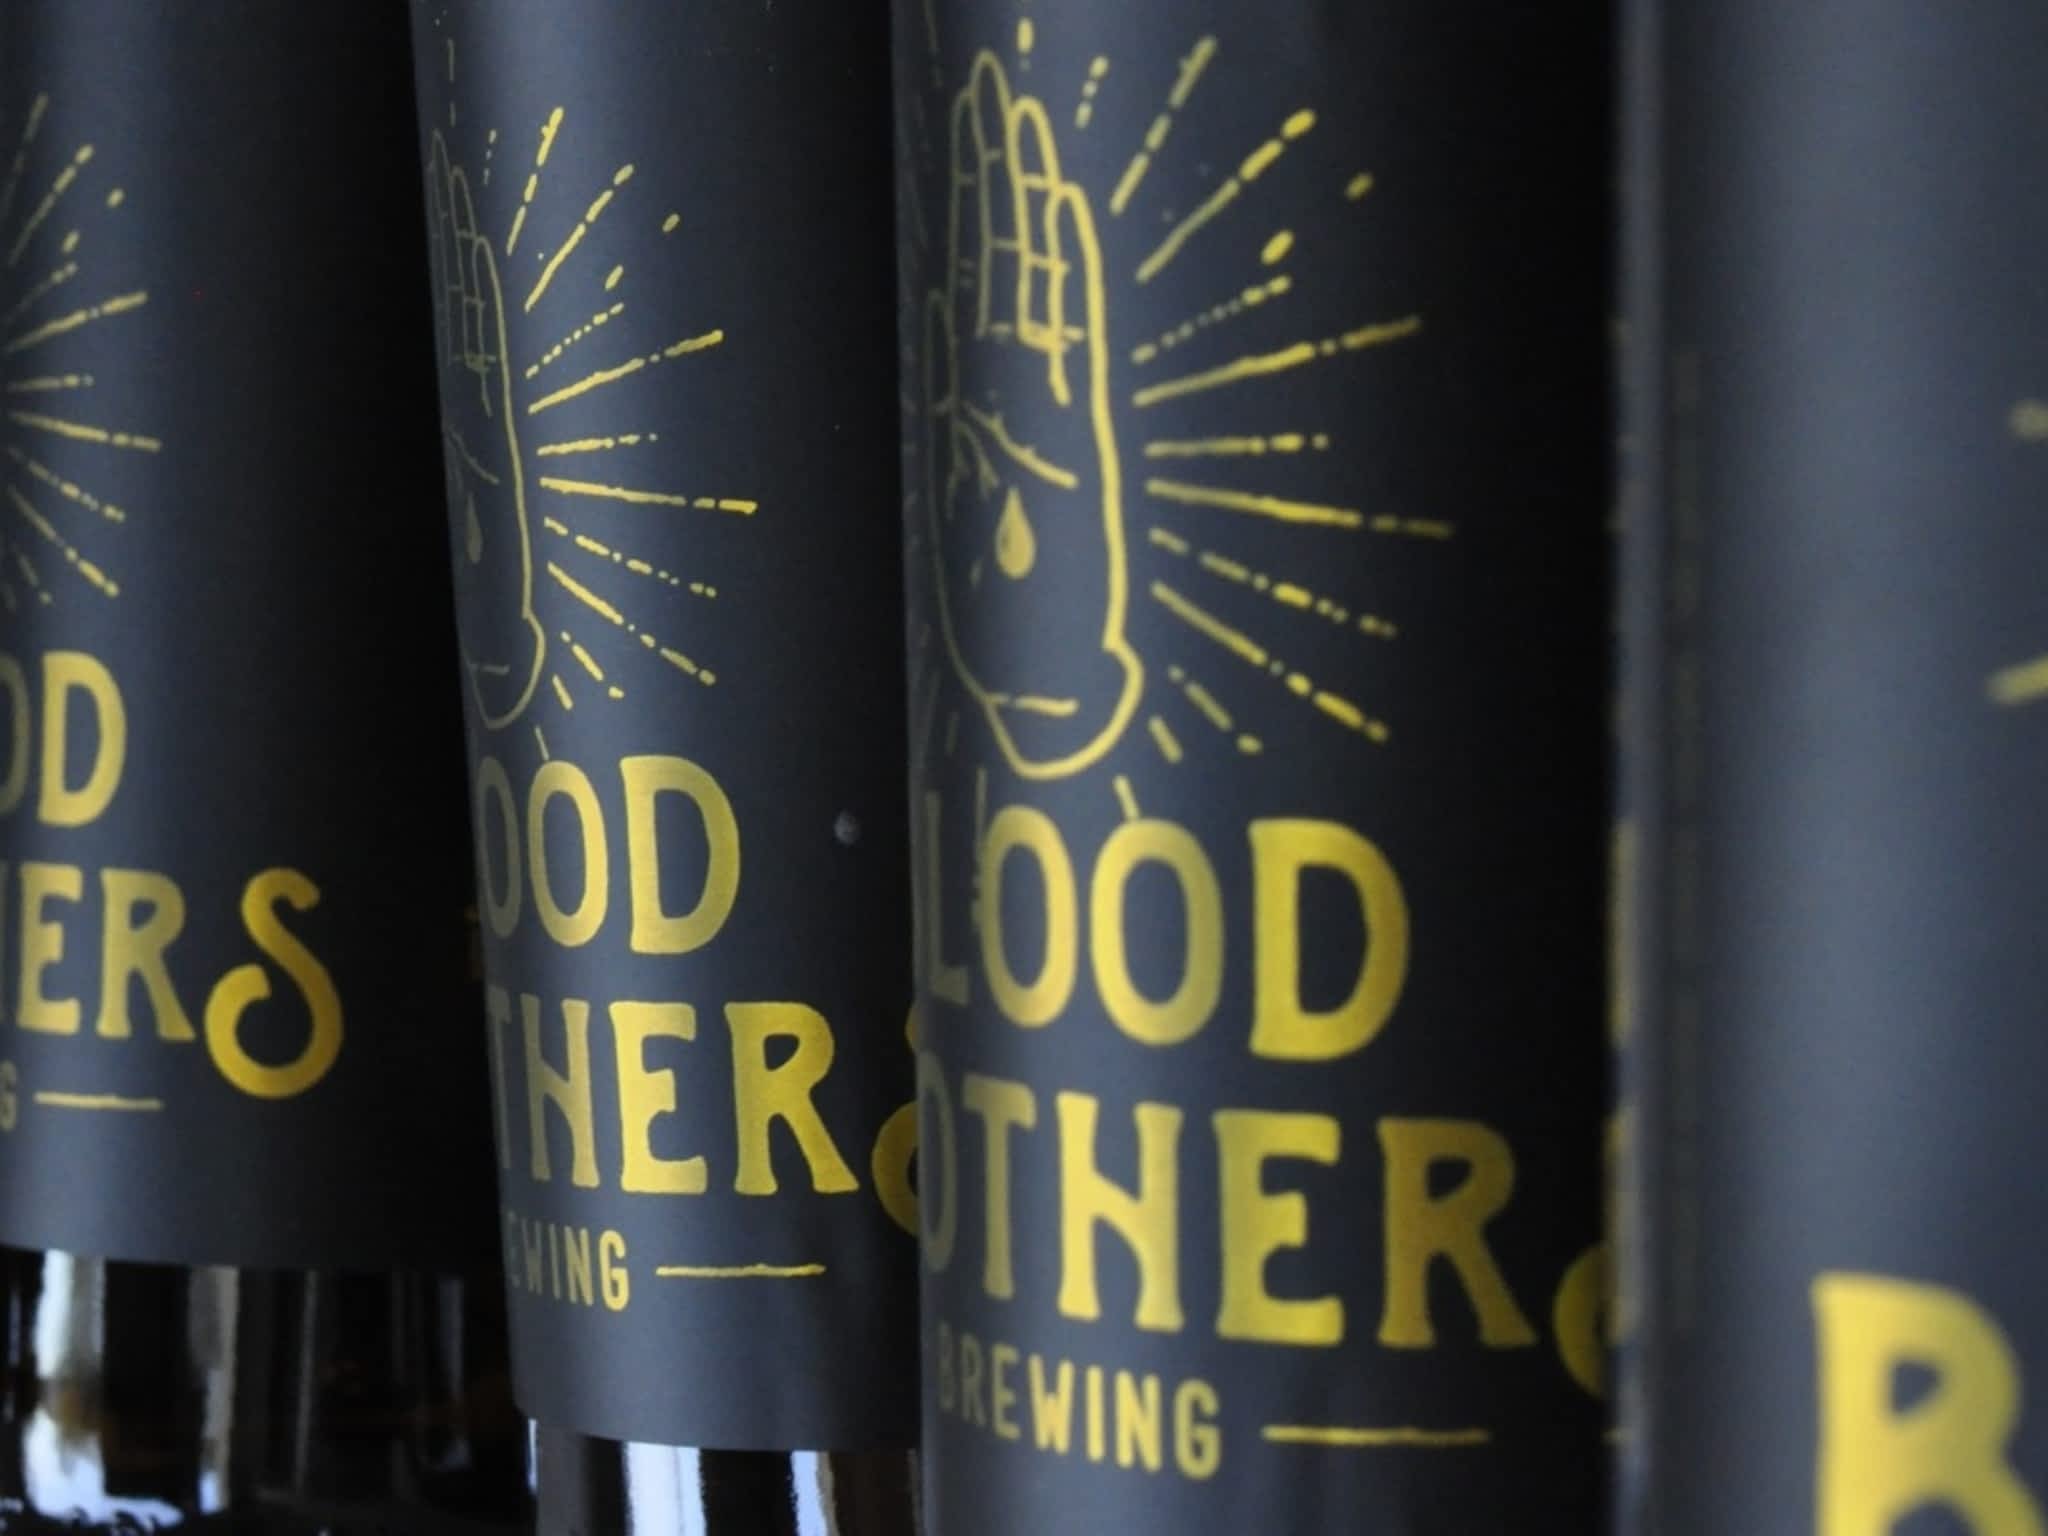 photo Blood Brothers Brewing